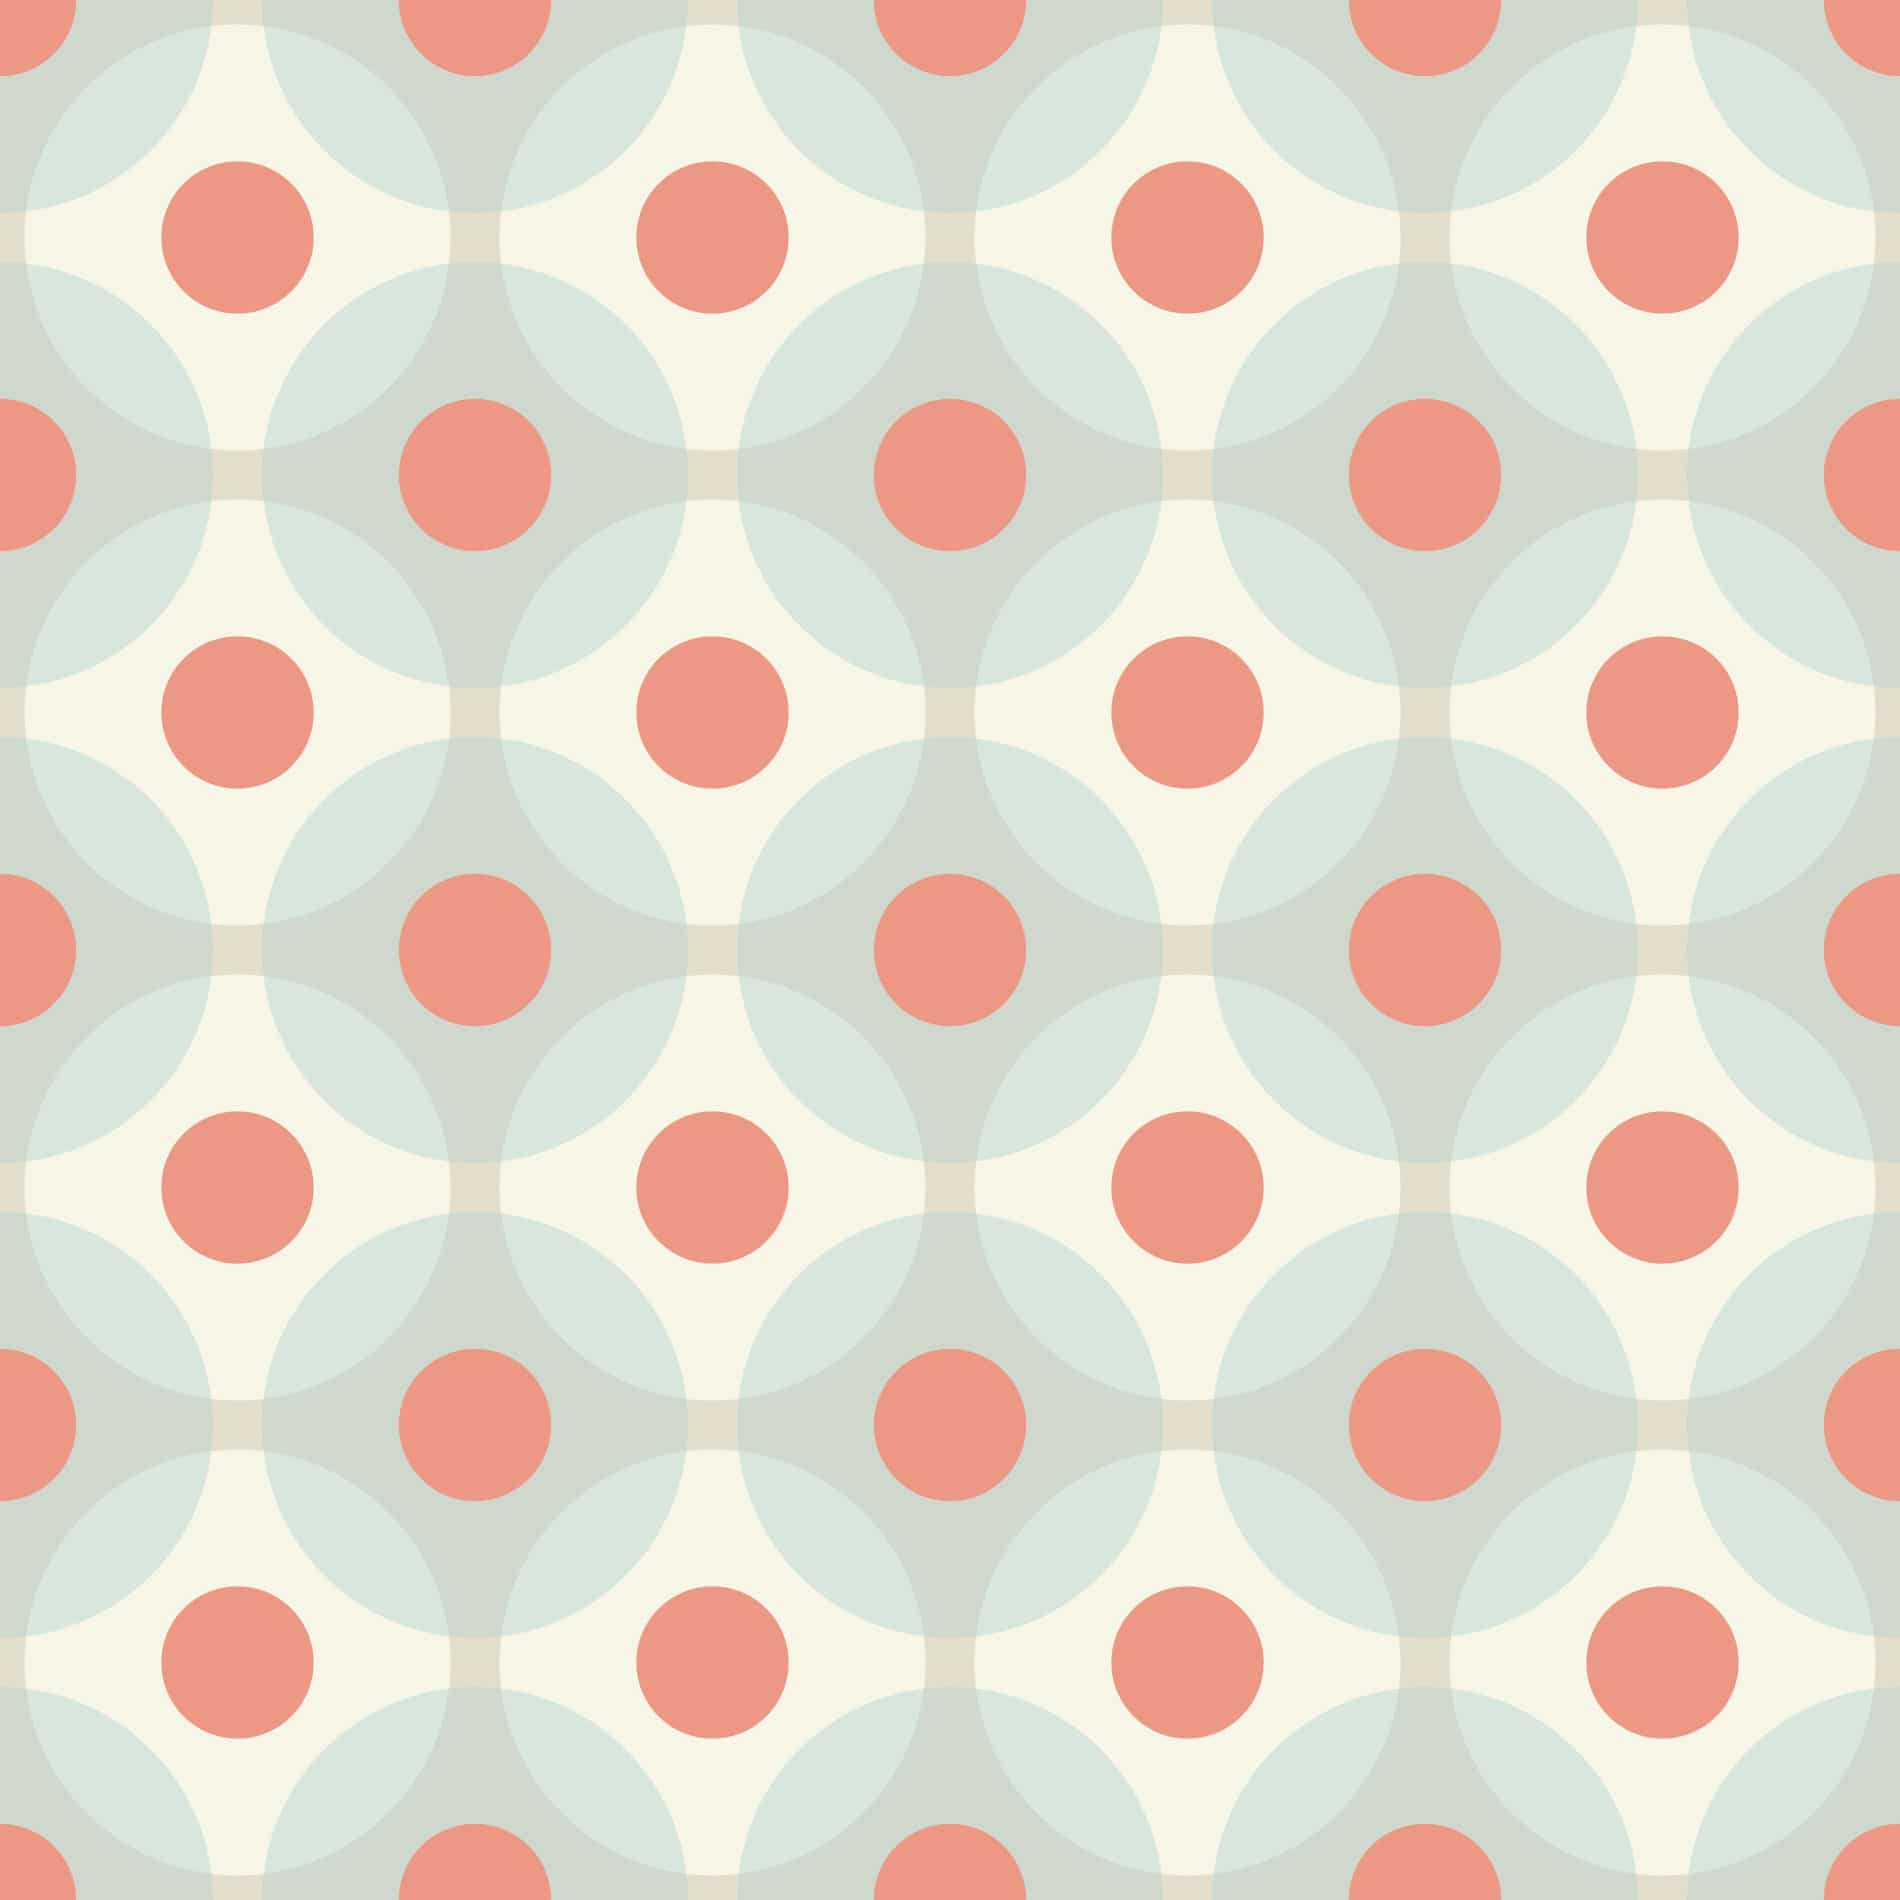 Retro geometric dotted wallpaper - Peel and Stick or Non-Pasted